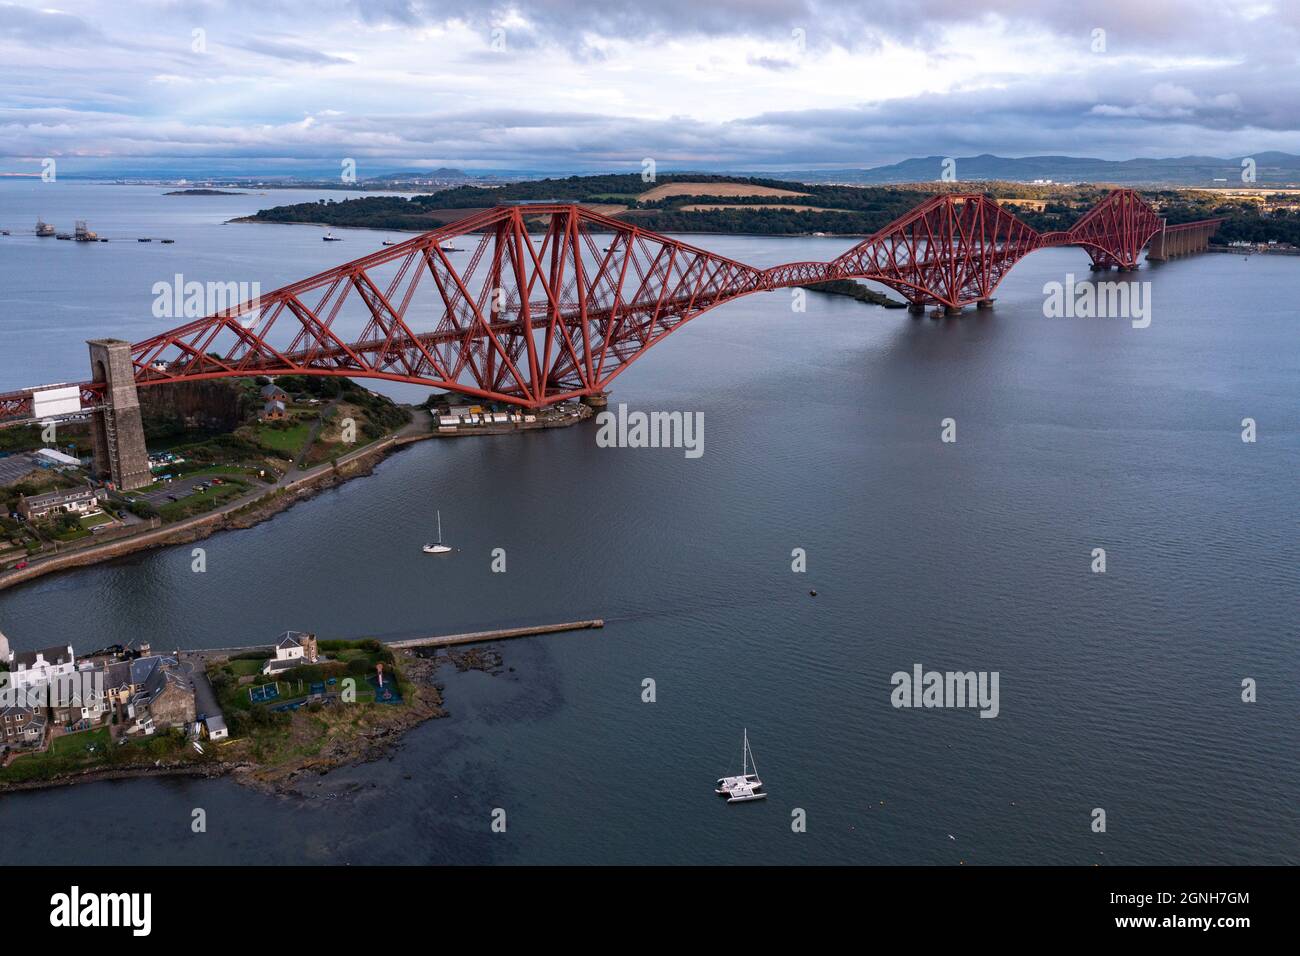 South Queensferry, Eaglesham, Scotland, UK. 25th Sep, 2021. PICTURED: Forth Rail Bridge, which is a national monument in its own right seen wearing its famous red lead paint which is needed to protect the structure from rusting from the elements. The bridge is painted by a team of painters, and when they finish they then start all over again. The bridge transports ScotRail train services from the east coast railway into Edinburgh's main hub of Waverley Train Station. Credit: Colin Fisher/Alamy Live News Stock Photo